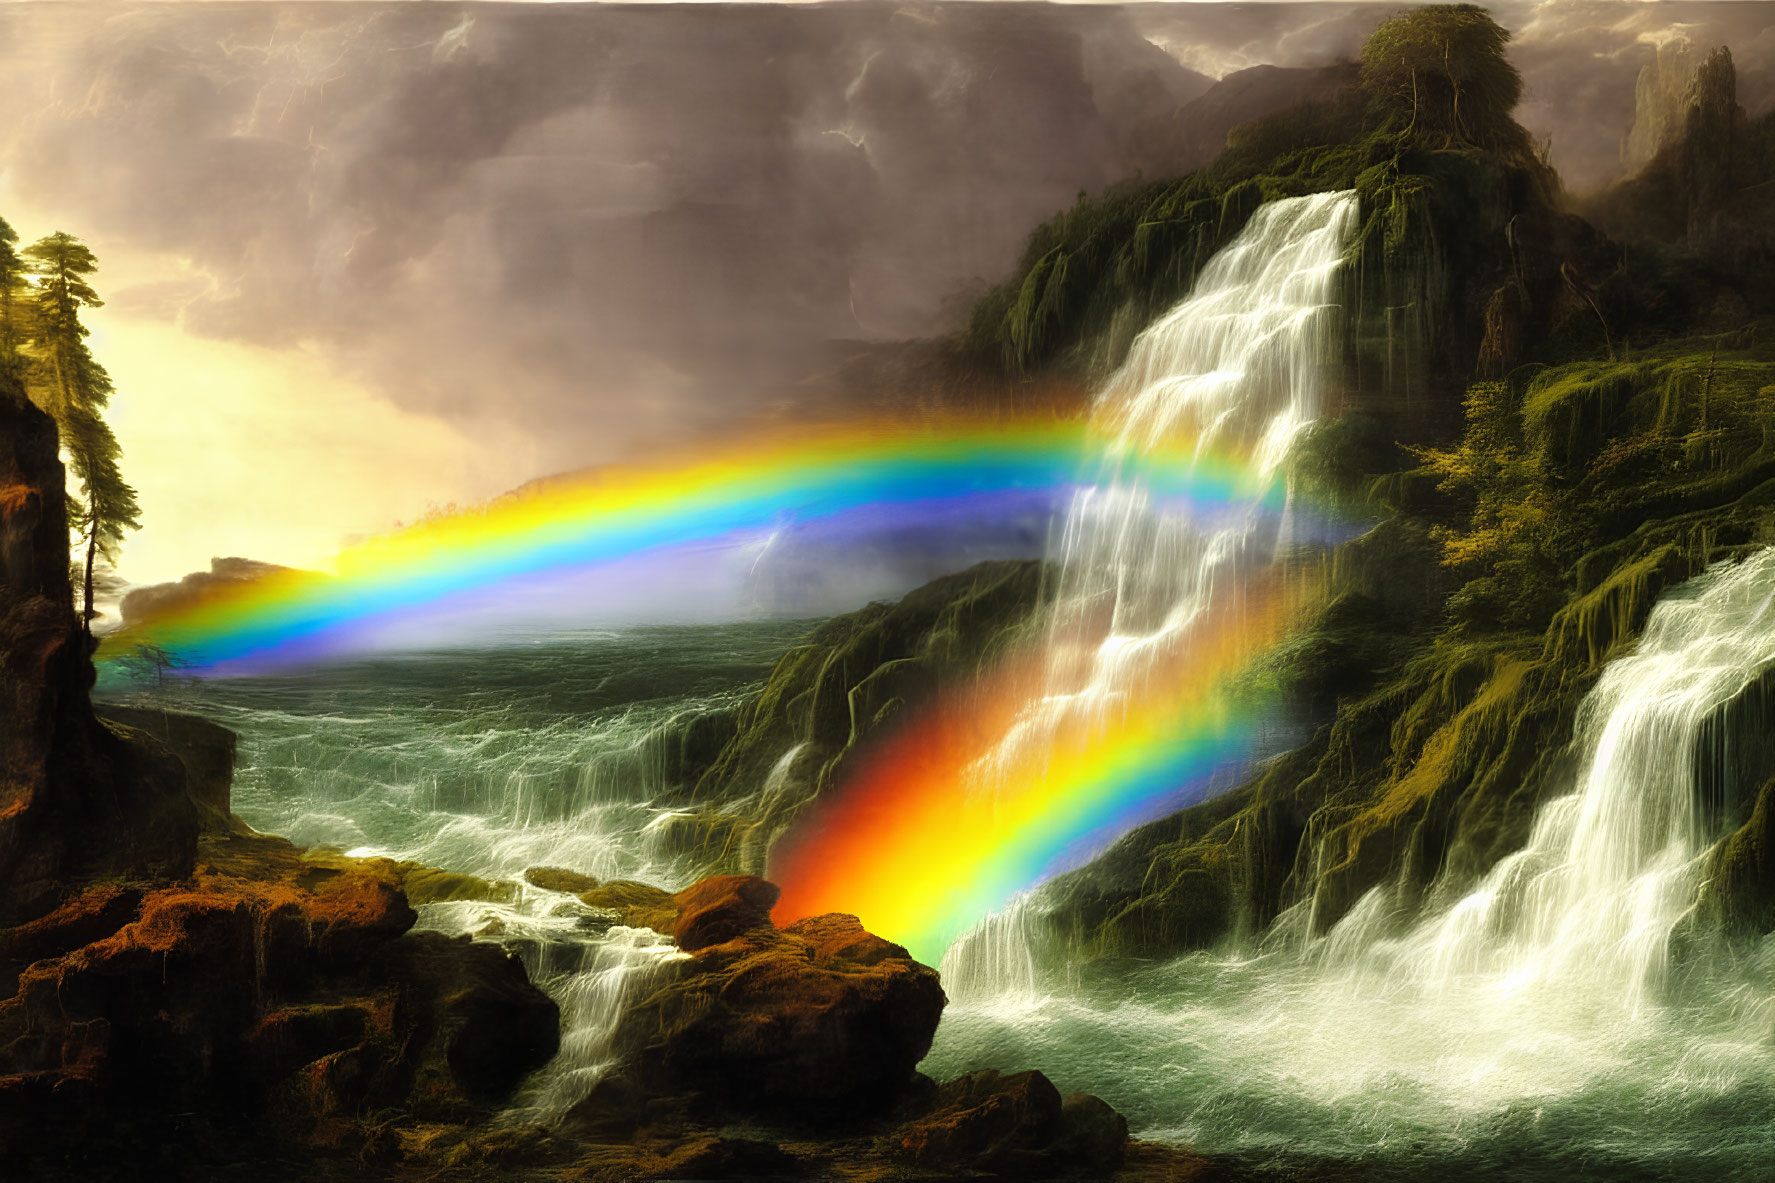 Scenic landscape: waterfall, rainbow, dramatic clouds